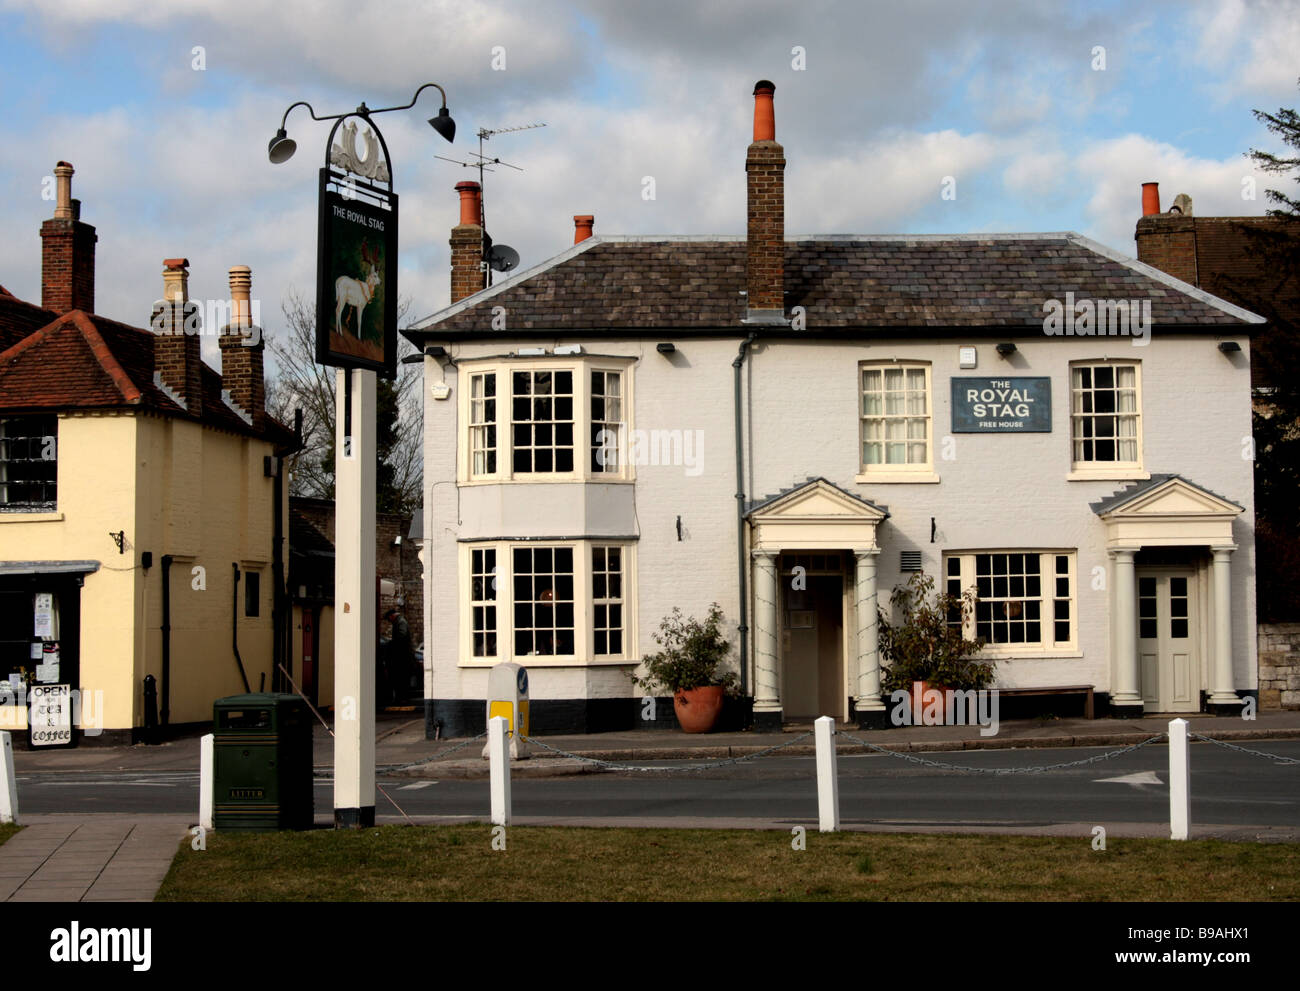 Le royal stag, The Manor, Windsor Berkshire. Banque D'Images